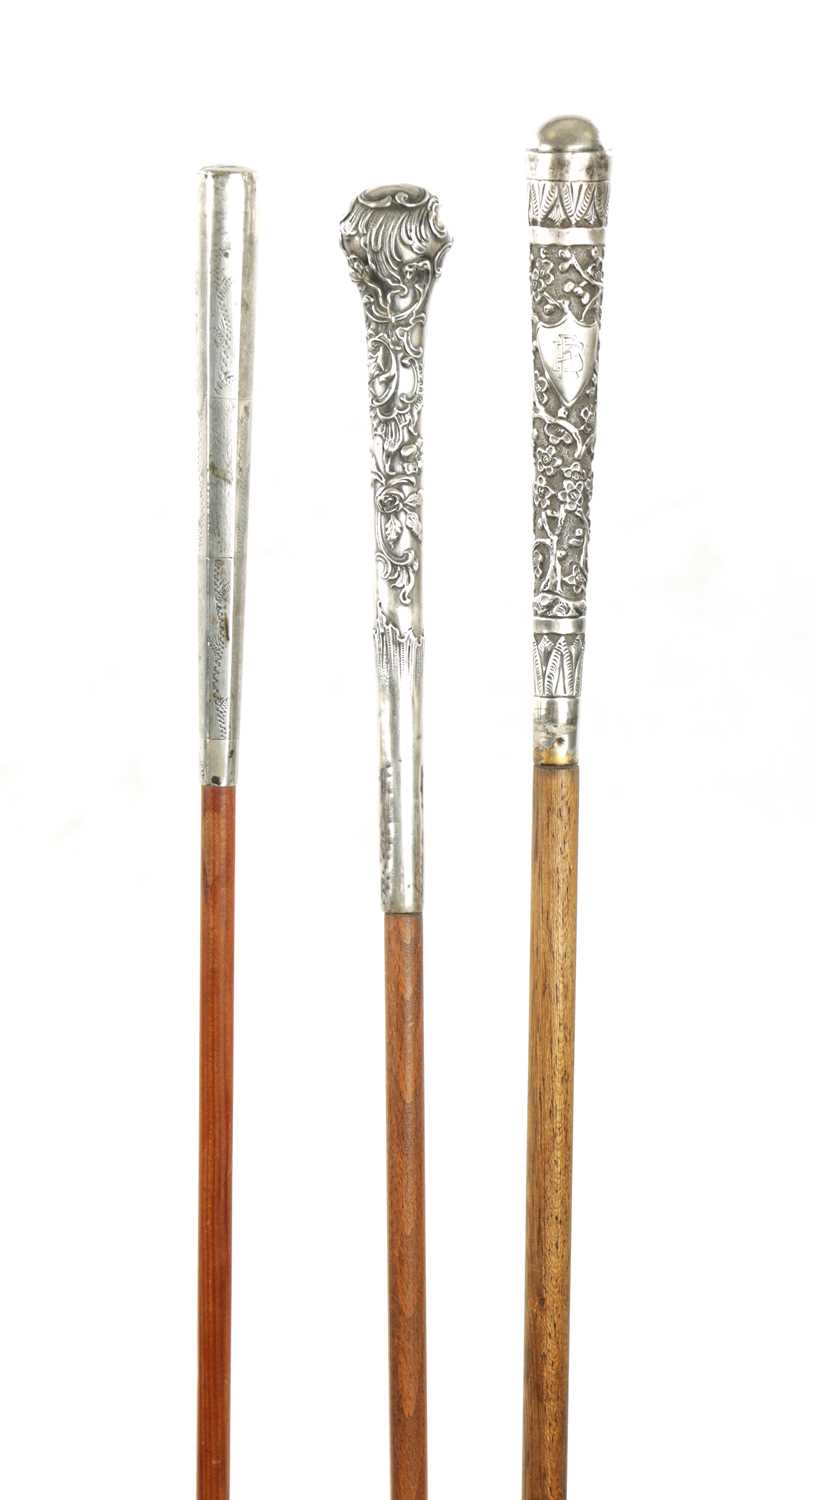 A COLLECTION OF THREE 19TH CENTURY LONG HANDLED SILVER TOPPED WALKING STICKS